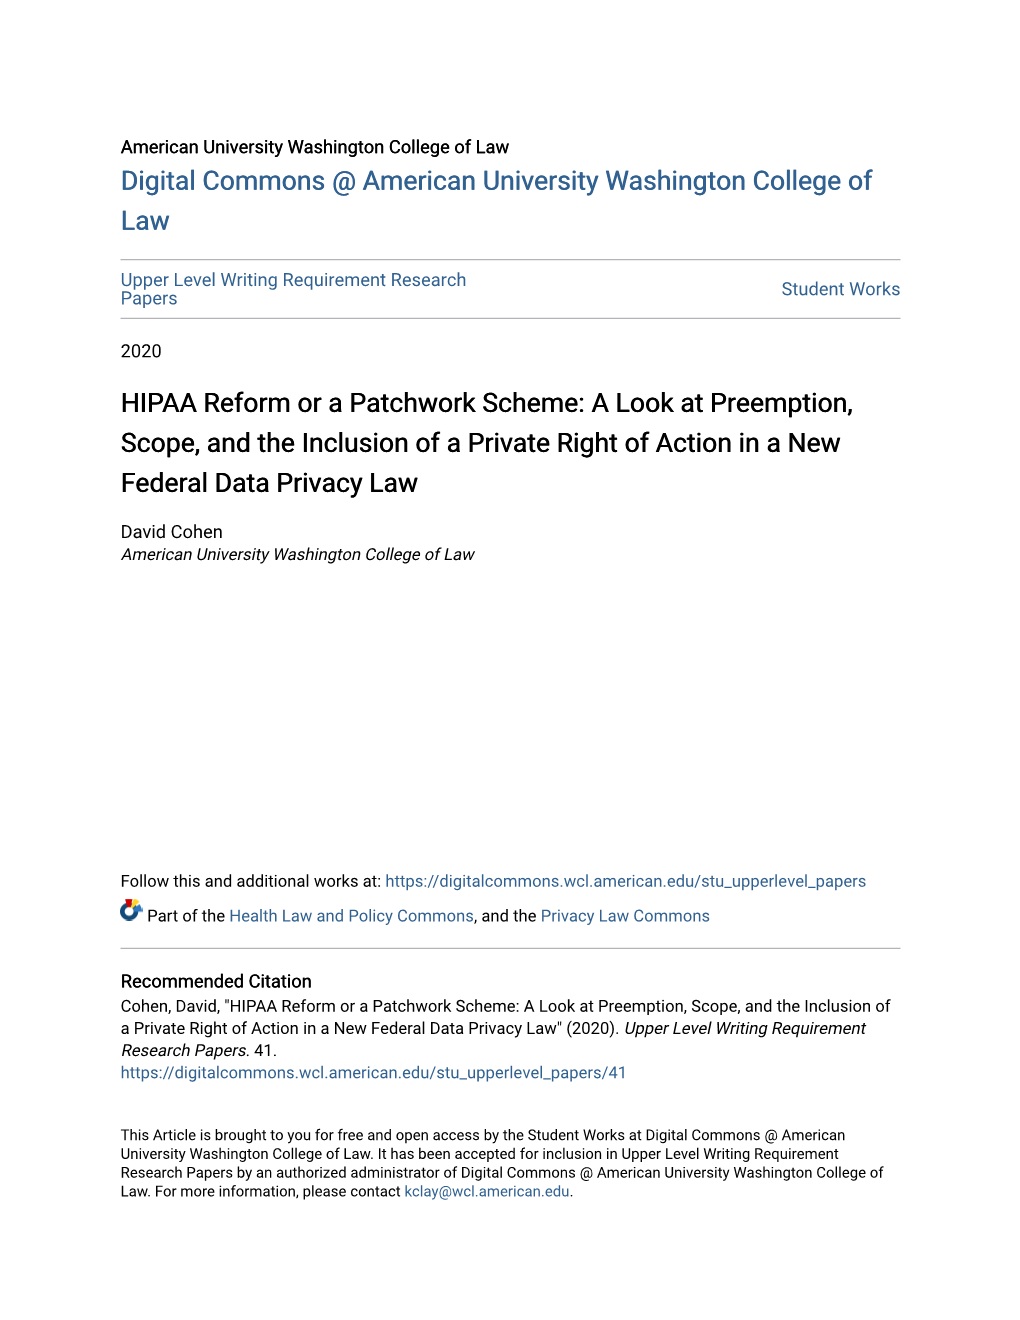 HIPAA Reform Or a Patchwork Scheme: a Look at Preemption, Scope, and the Inclusion of a Private Right of Action in a New Federal Data Privacy Law